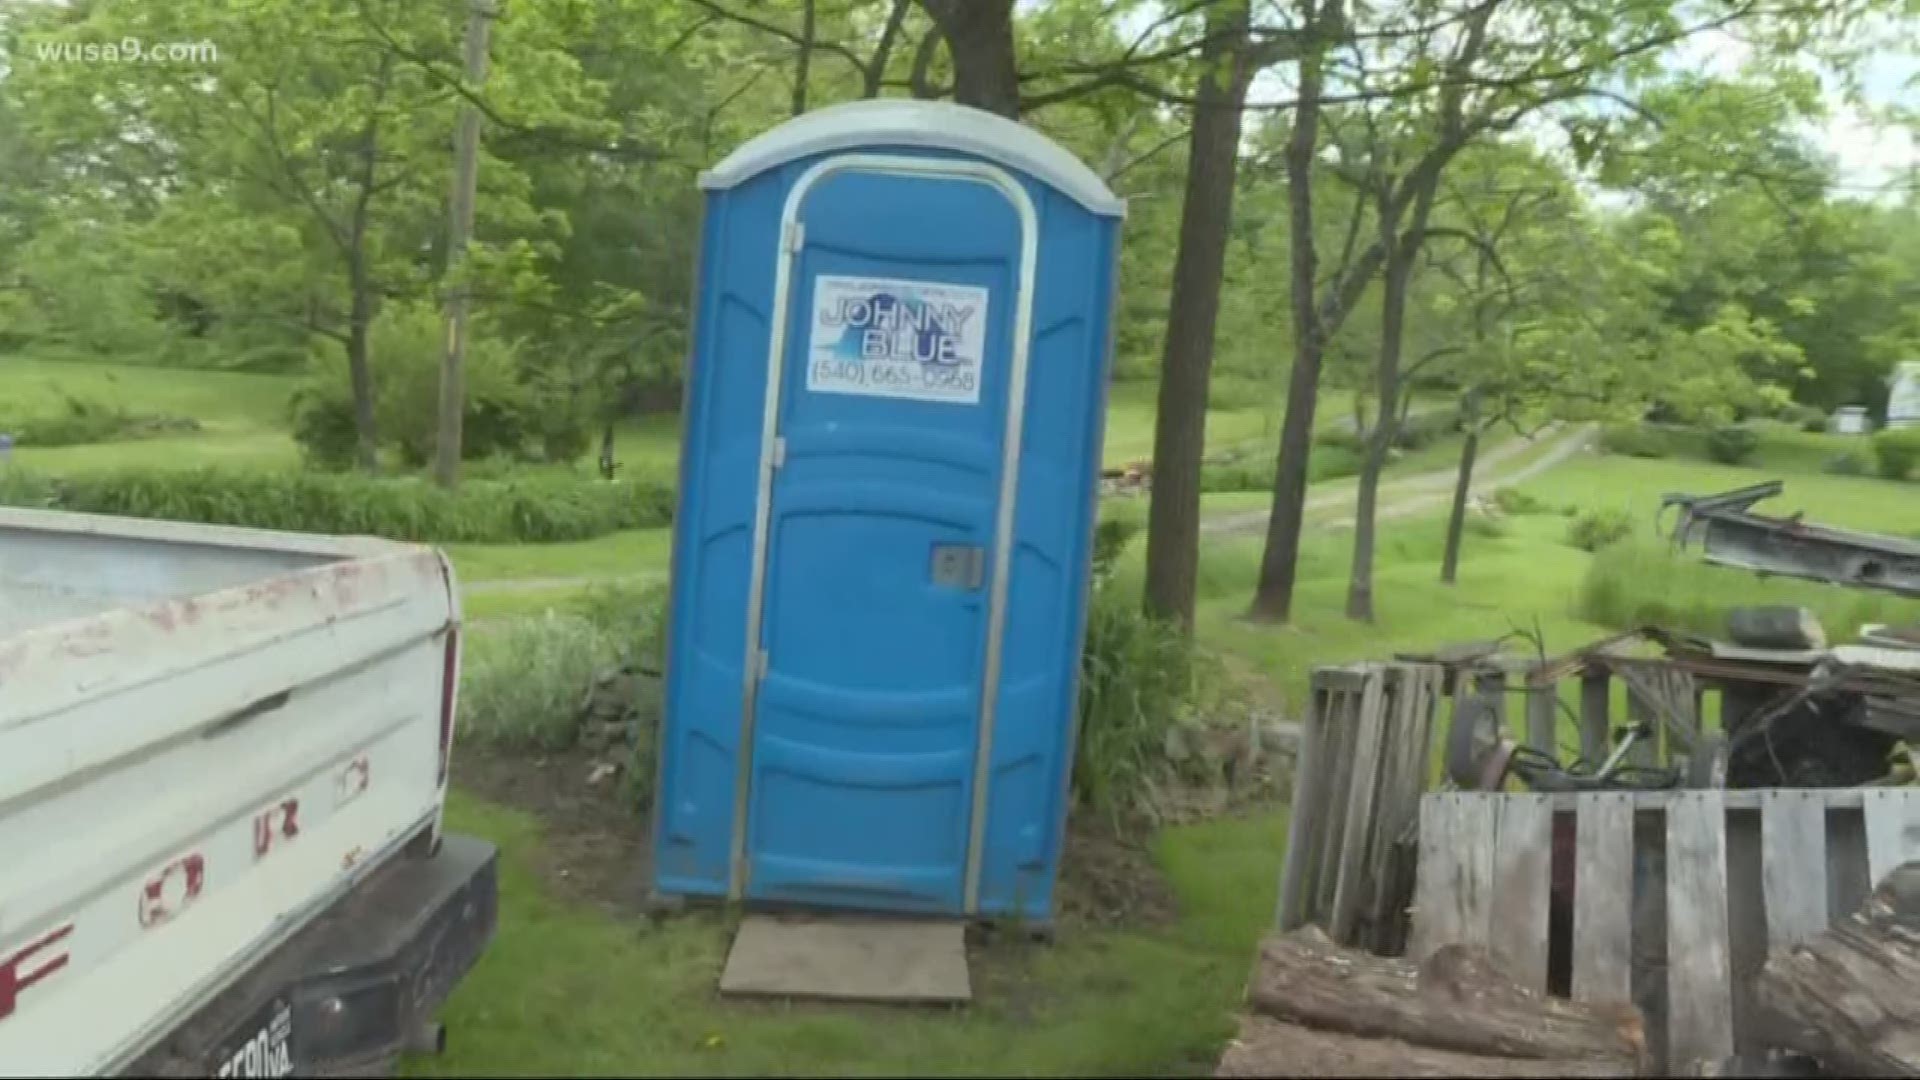 In Loudoun County some residents still don't have indoor plumbing in one of the wealthiest counties in the country. They use out-houses and port-a potties and buy bottled water to drink.